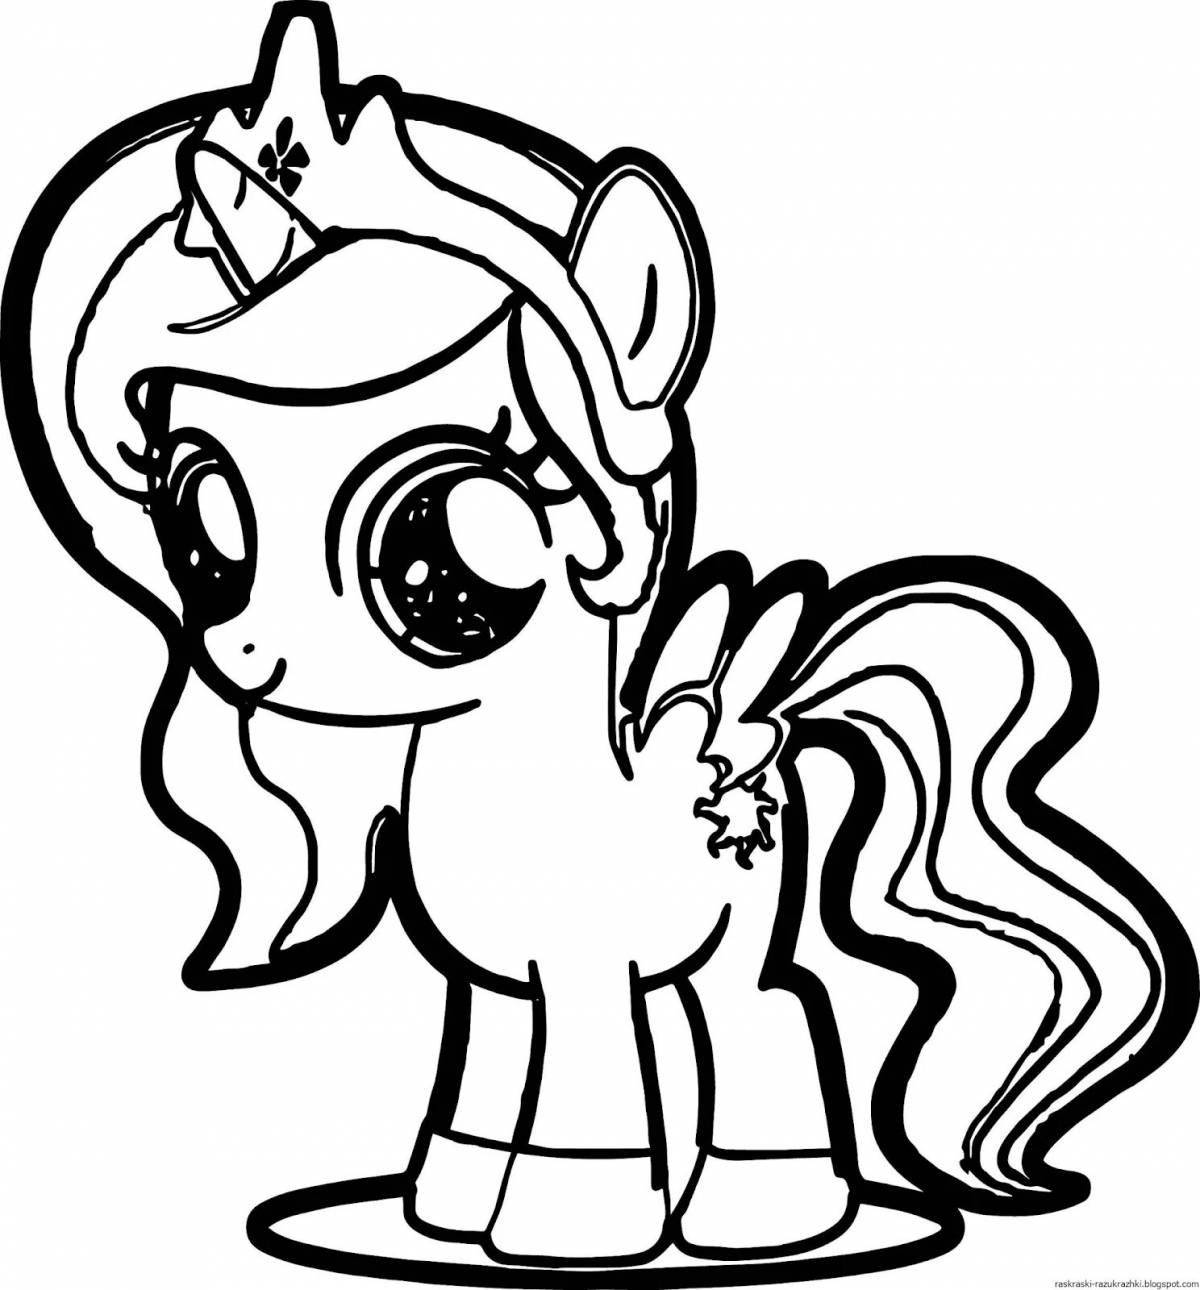 Adorable printed pony coloring book